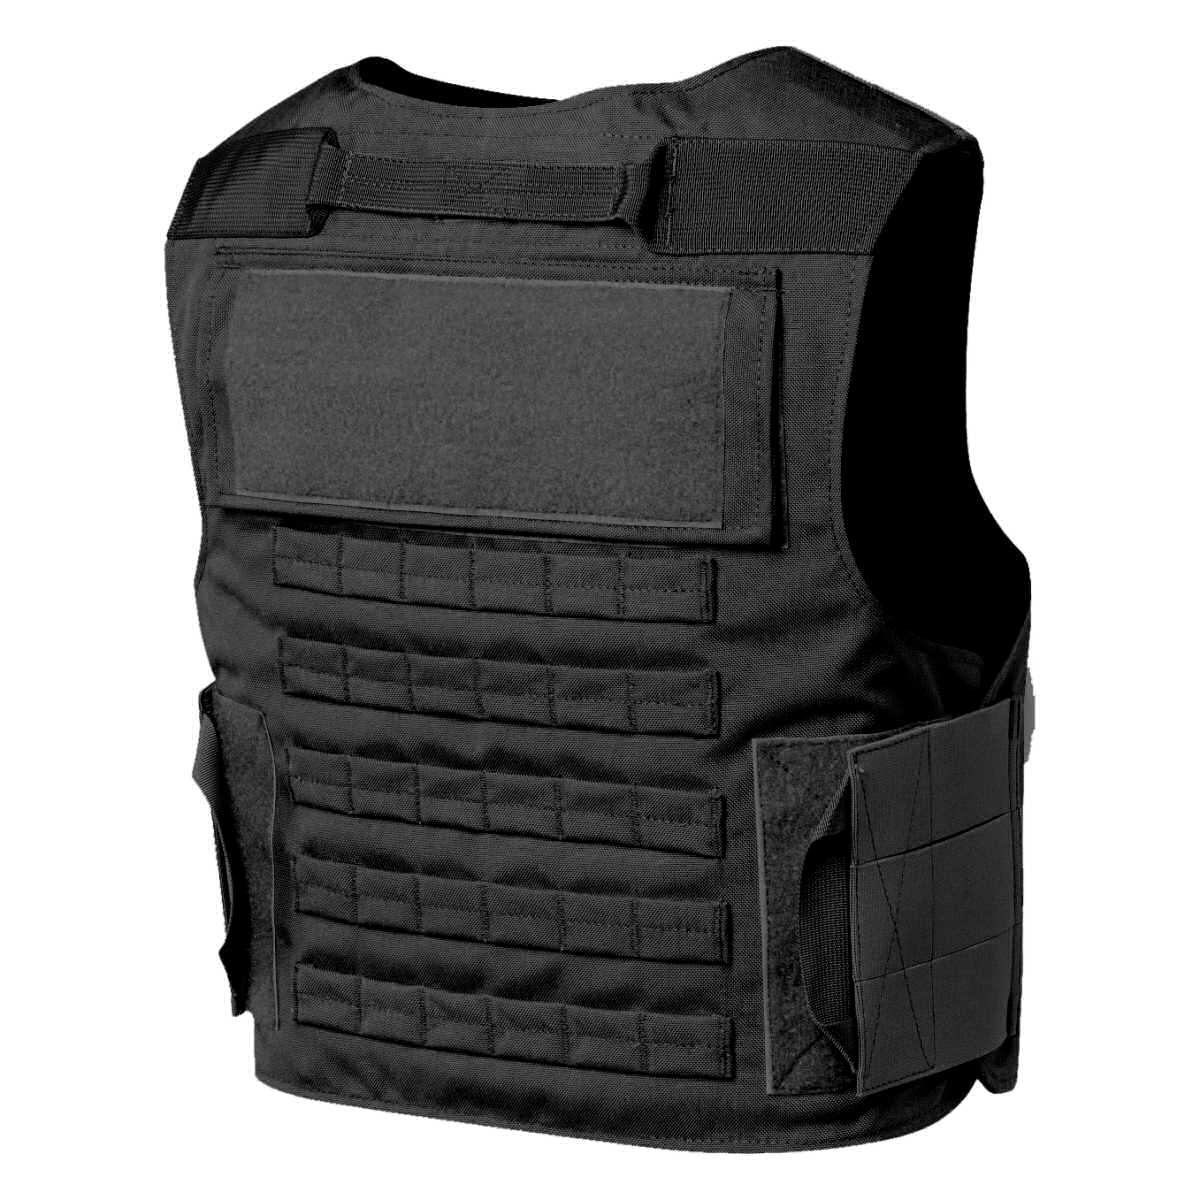 US Armor Ready Vest G2 Carrier | Body Armor Outlet